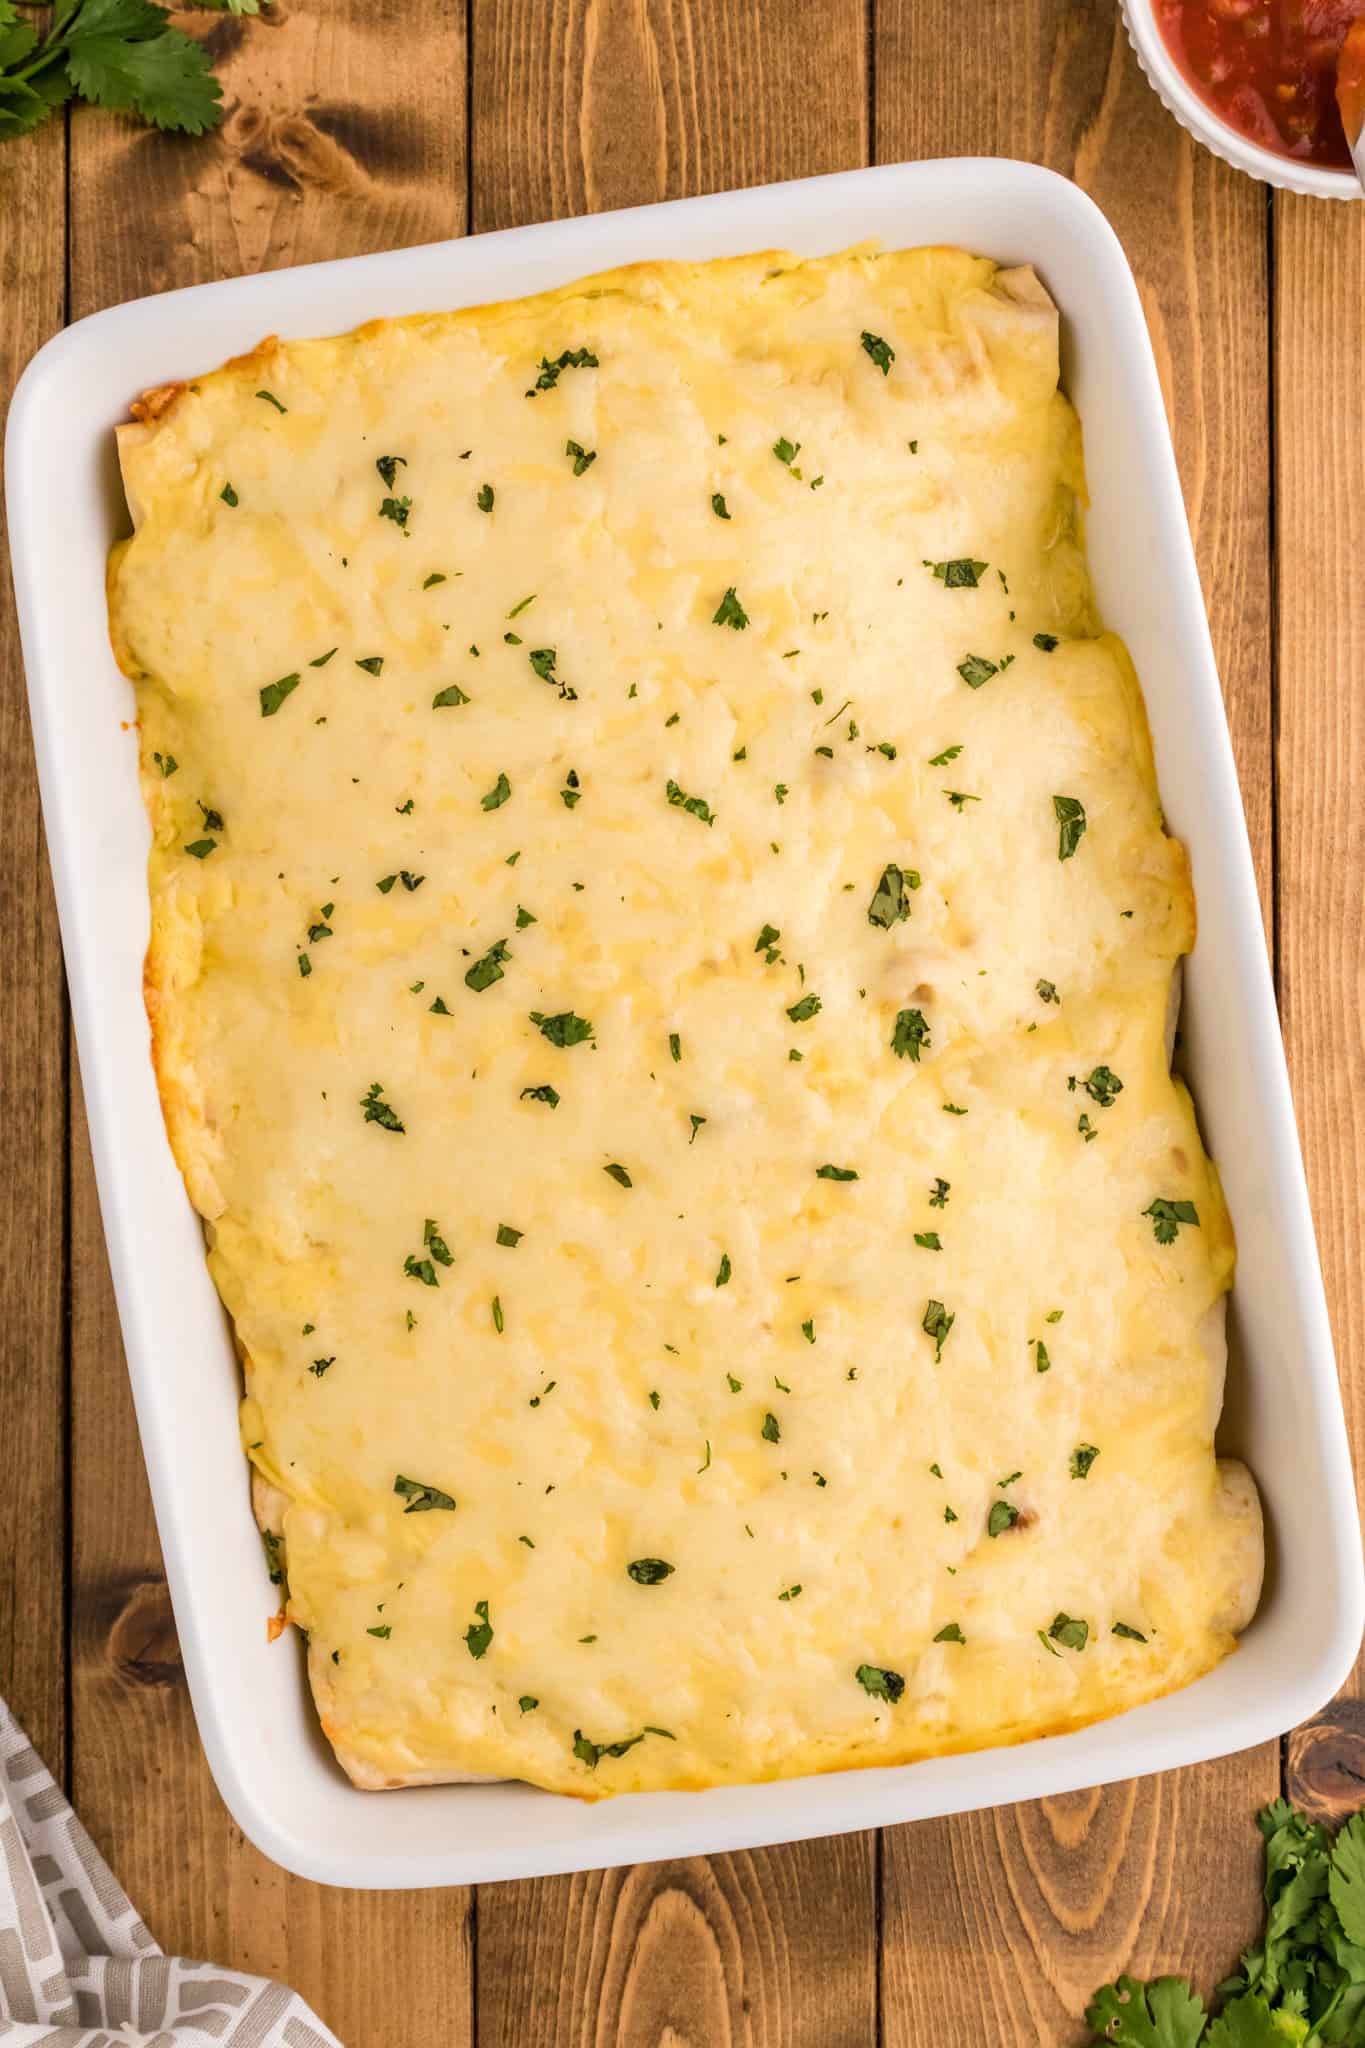 White Chicken Enchiladas are delicious baked tortillas filled with shredded chicken, cream cheese and green chilis baked in a creamy sauce and topped with cheese.